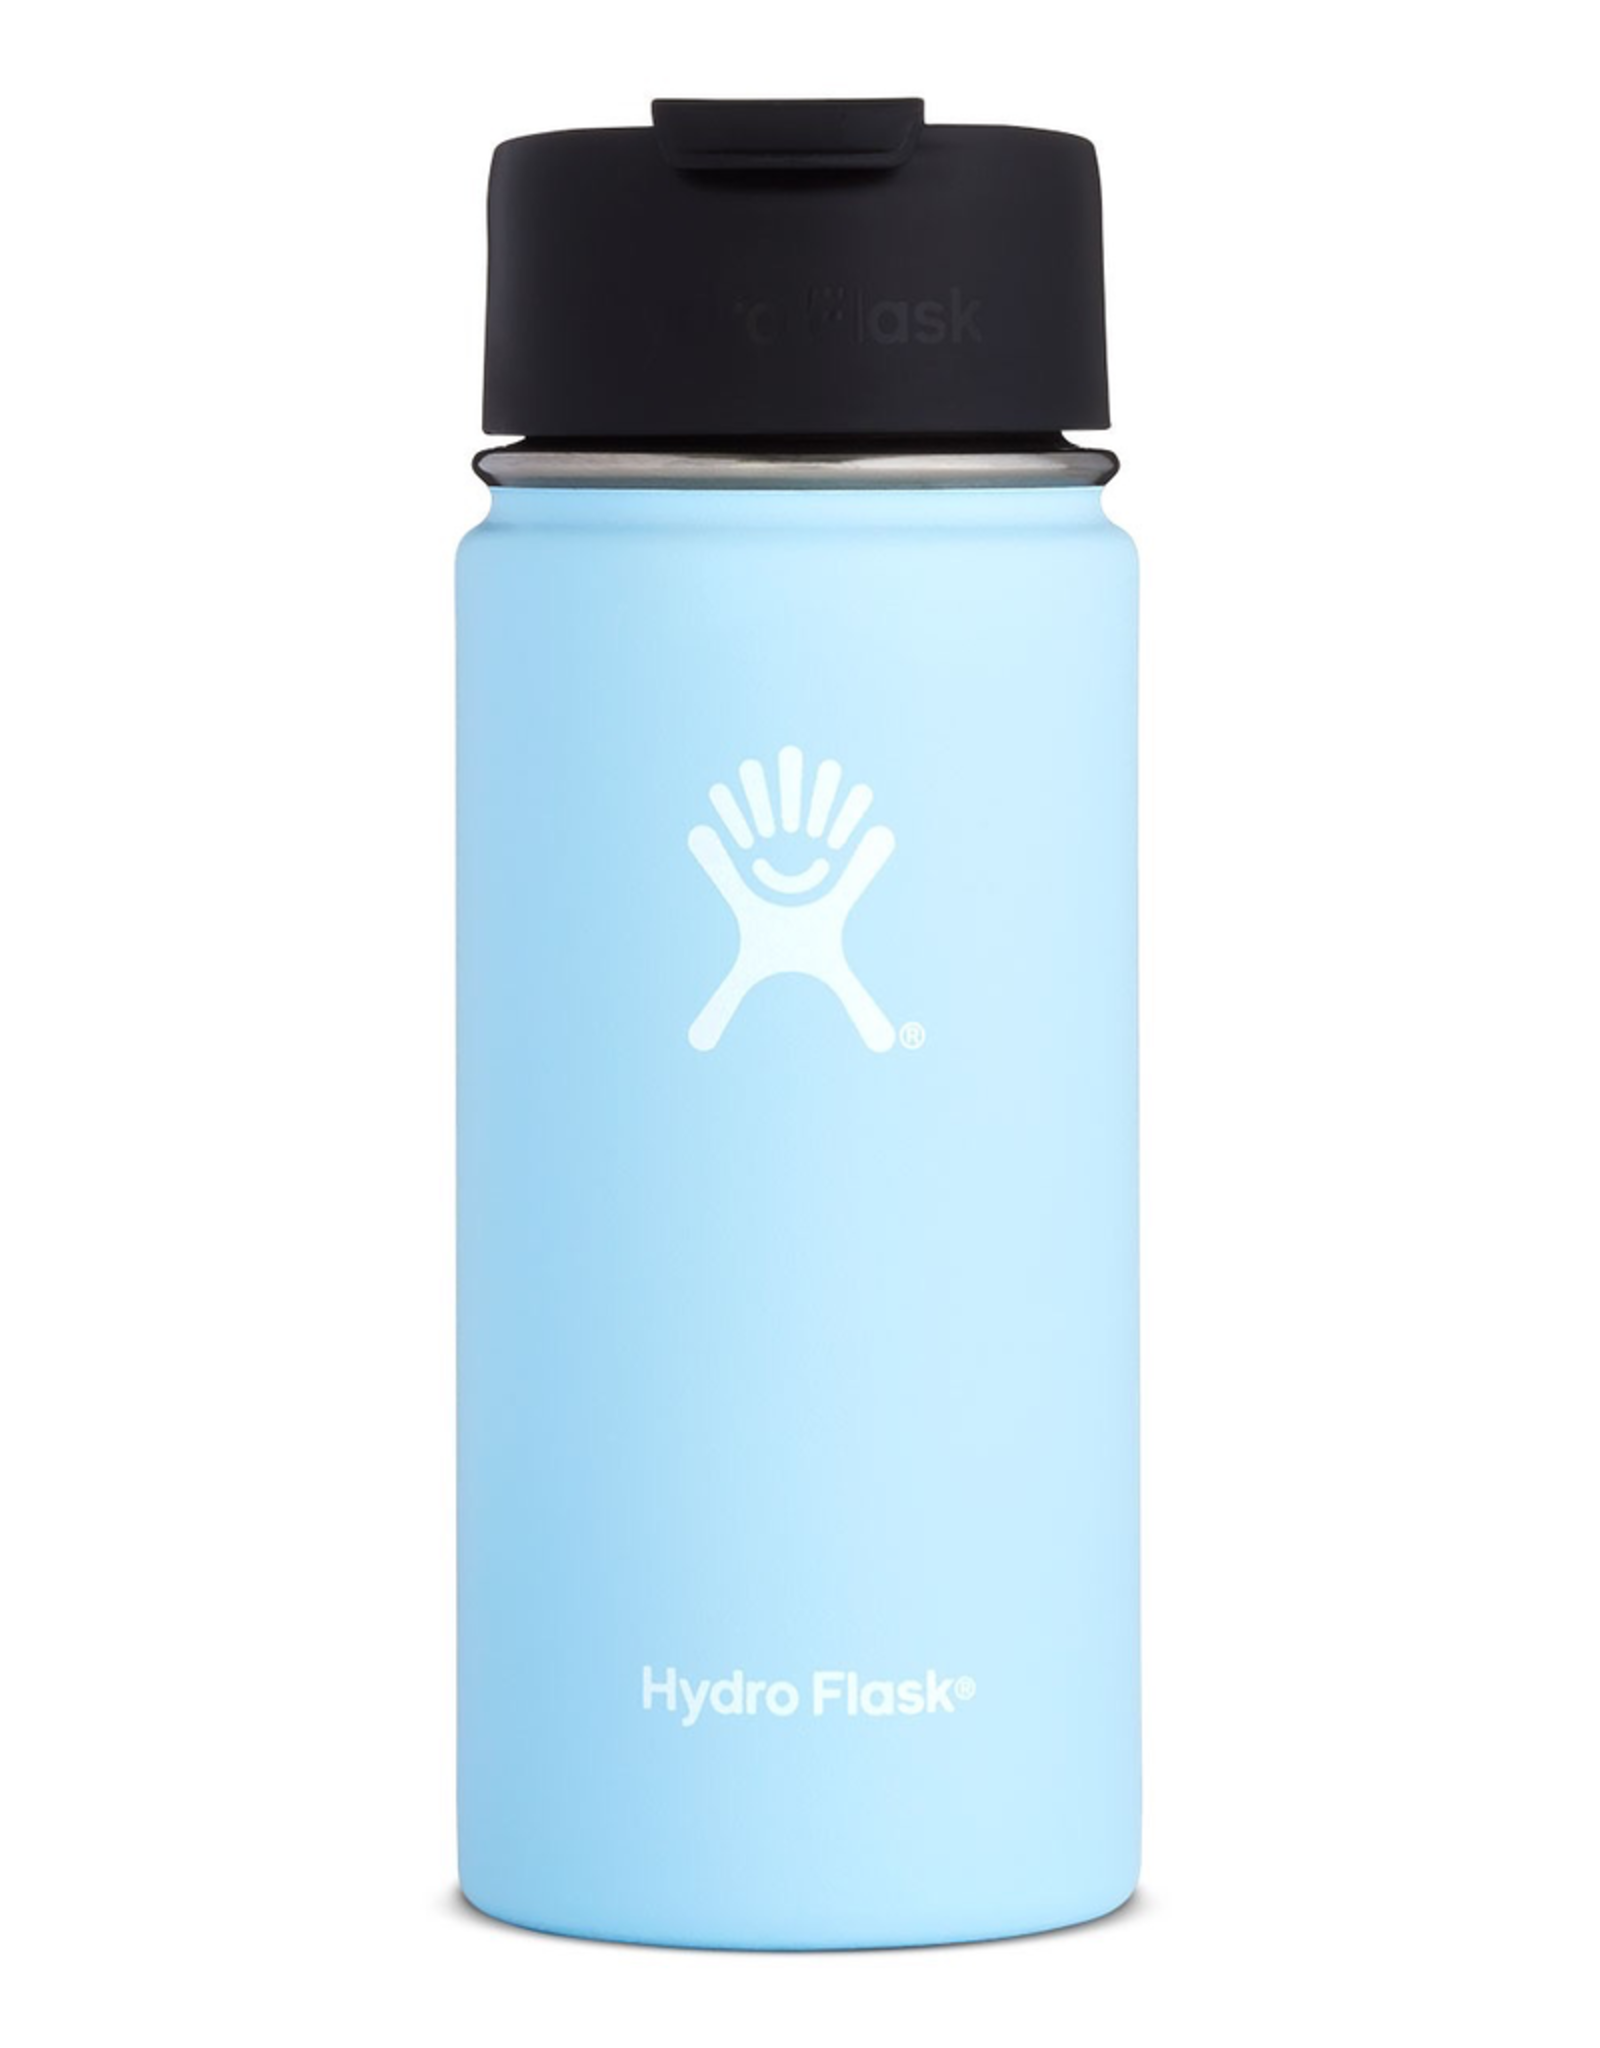 hydro flask 16 oz coffee review